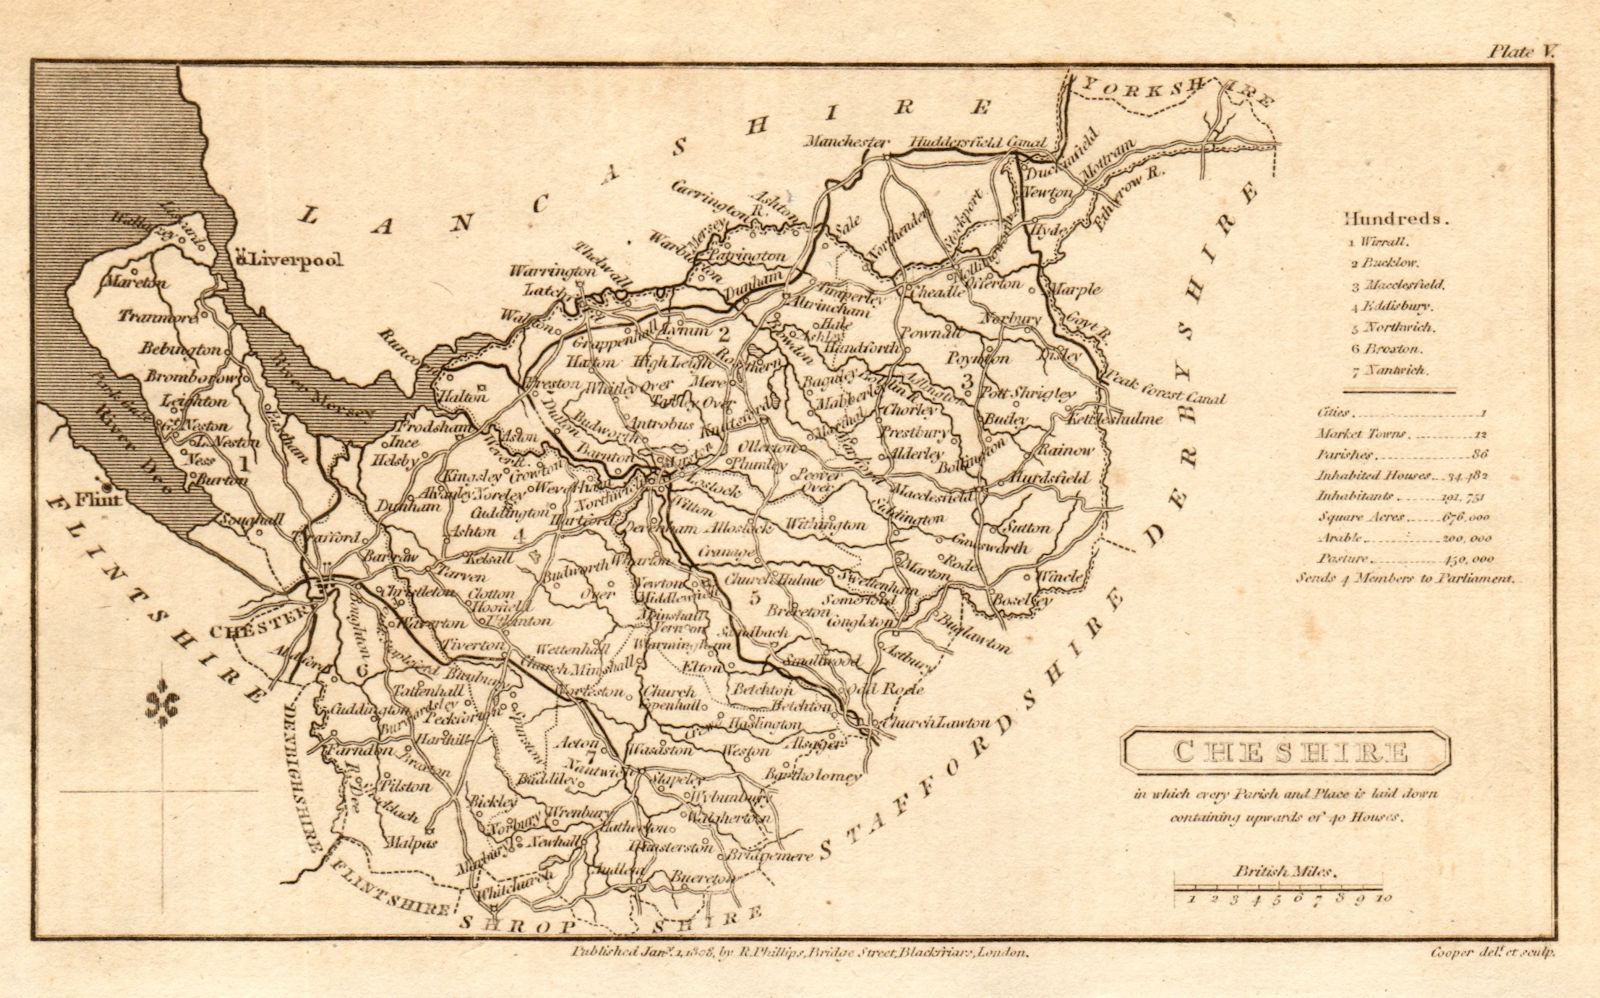 Associate Product Antique county map of CHESHIRE by Henry Cooper for Benjamin Pitts Capper 1808